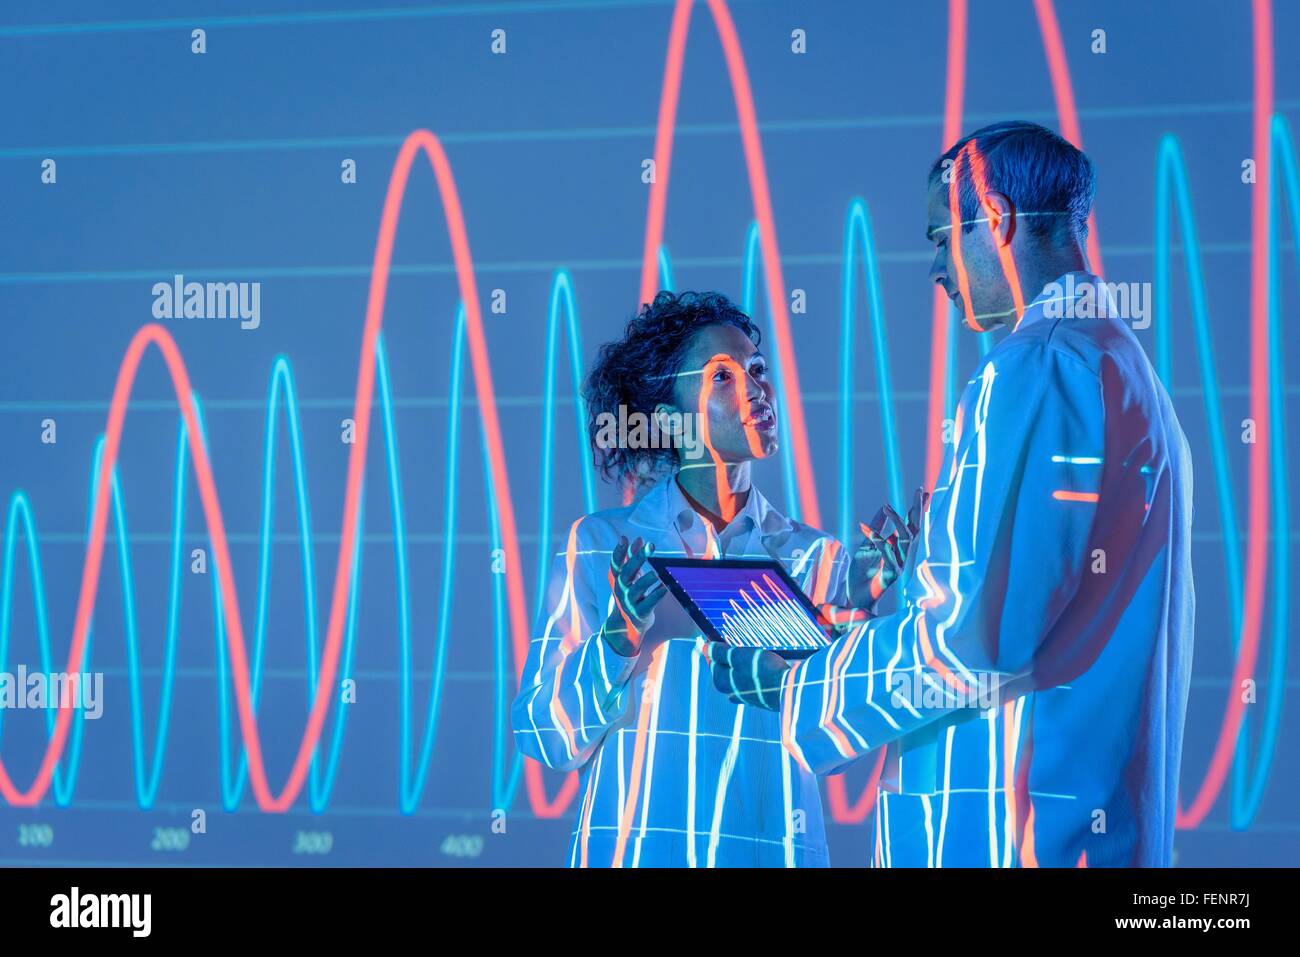 Scientists in discussion with graphical data projection Stock Photo